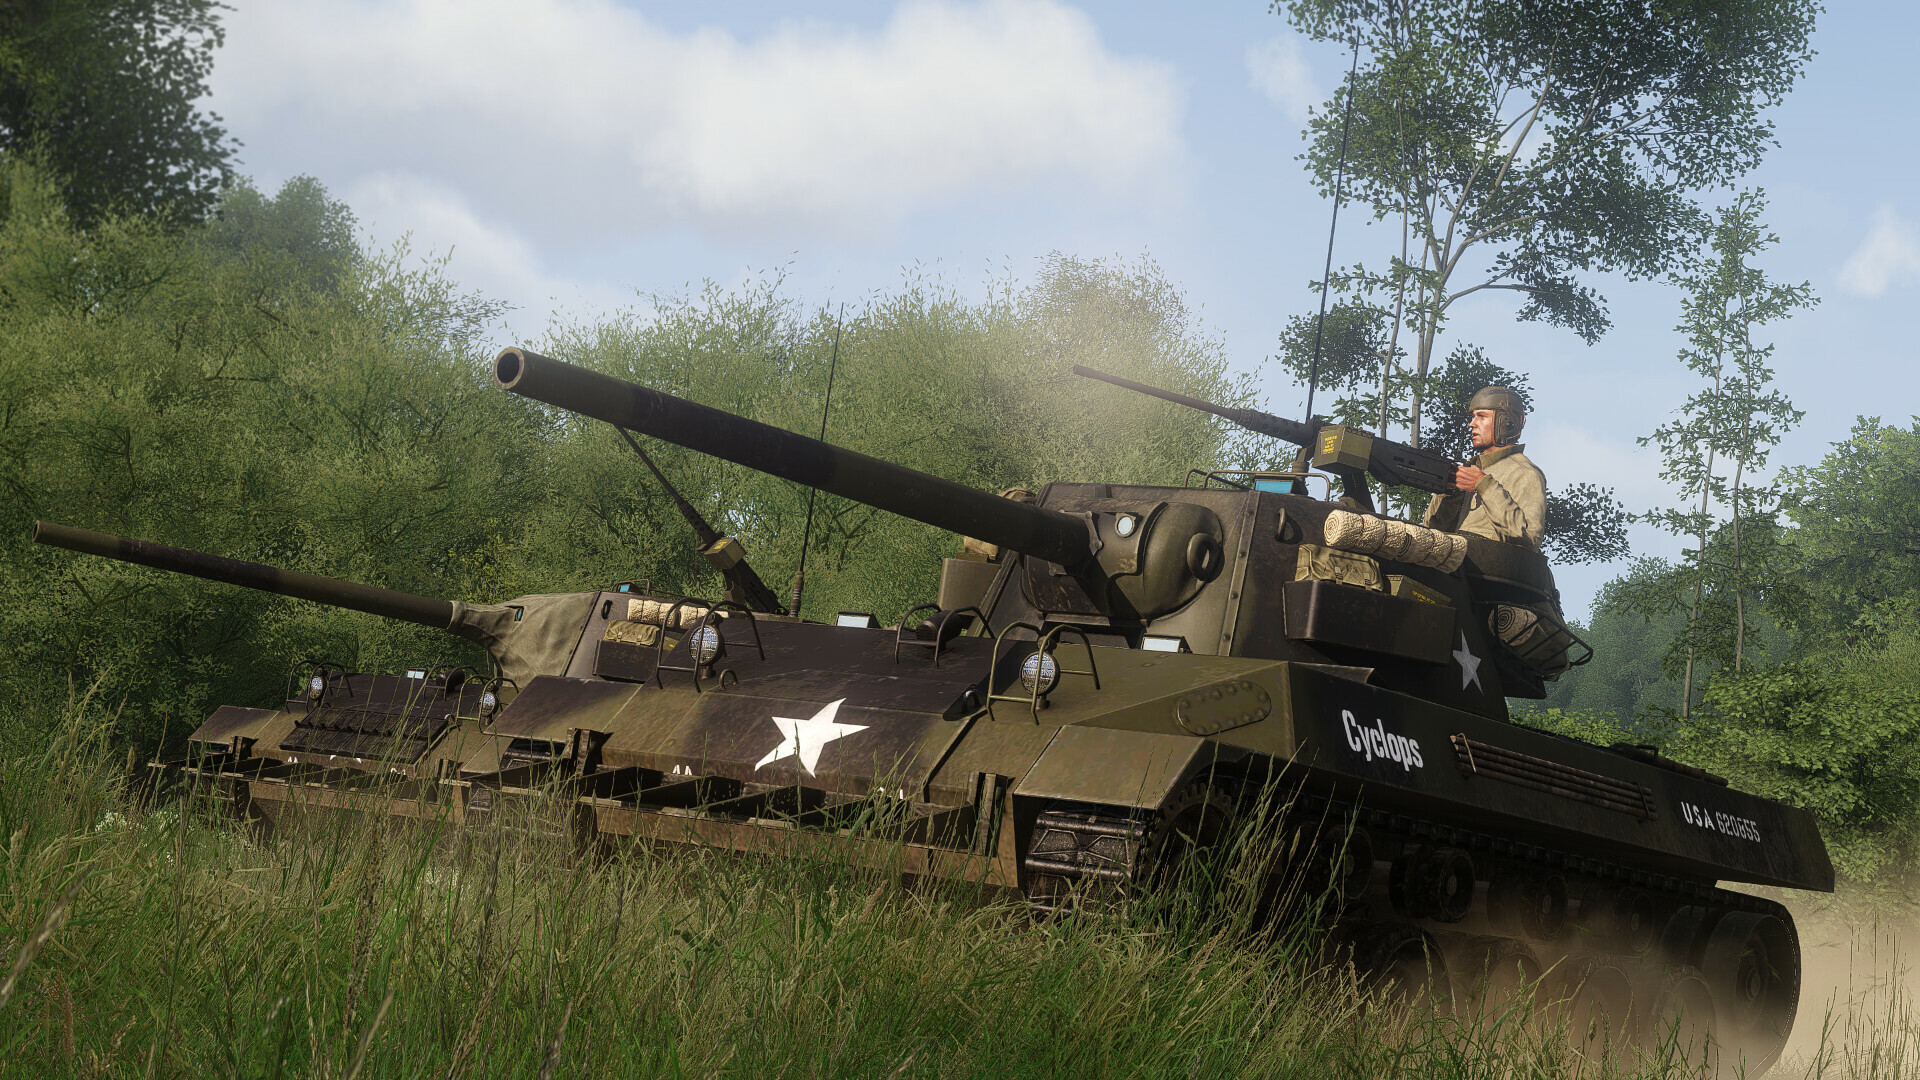 New Arma 3 DLC adds WW2 co-op campaign “on a scale not seen before”